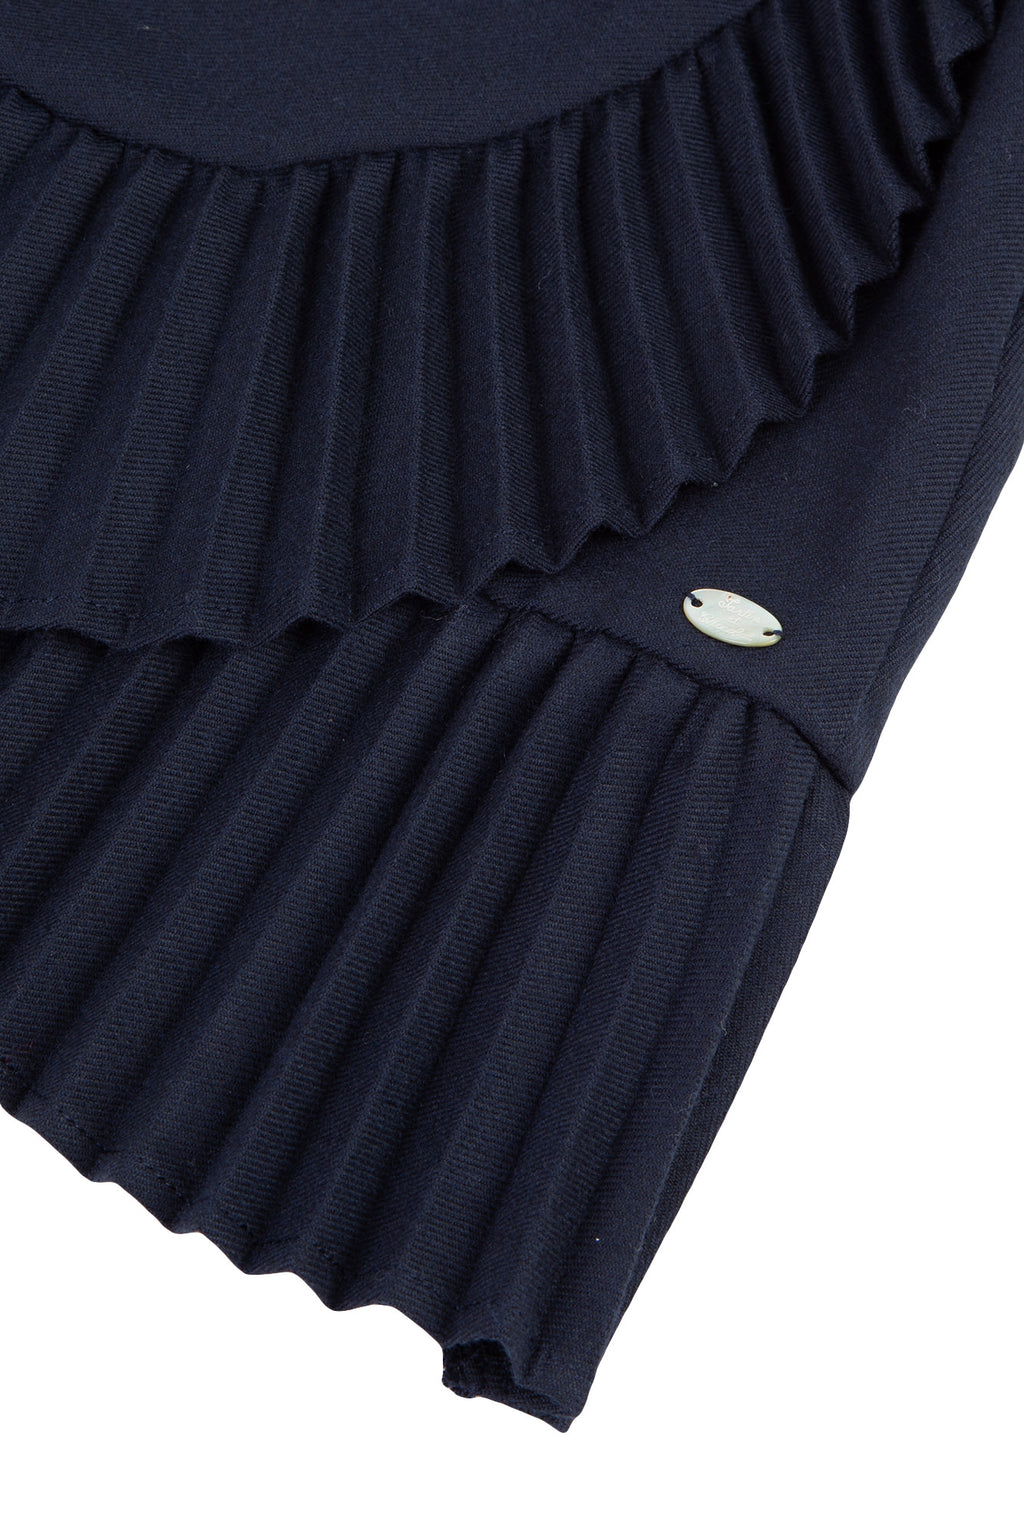 Skirt - Navy Flannel pleated